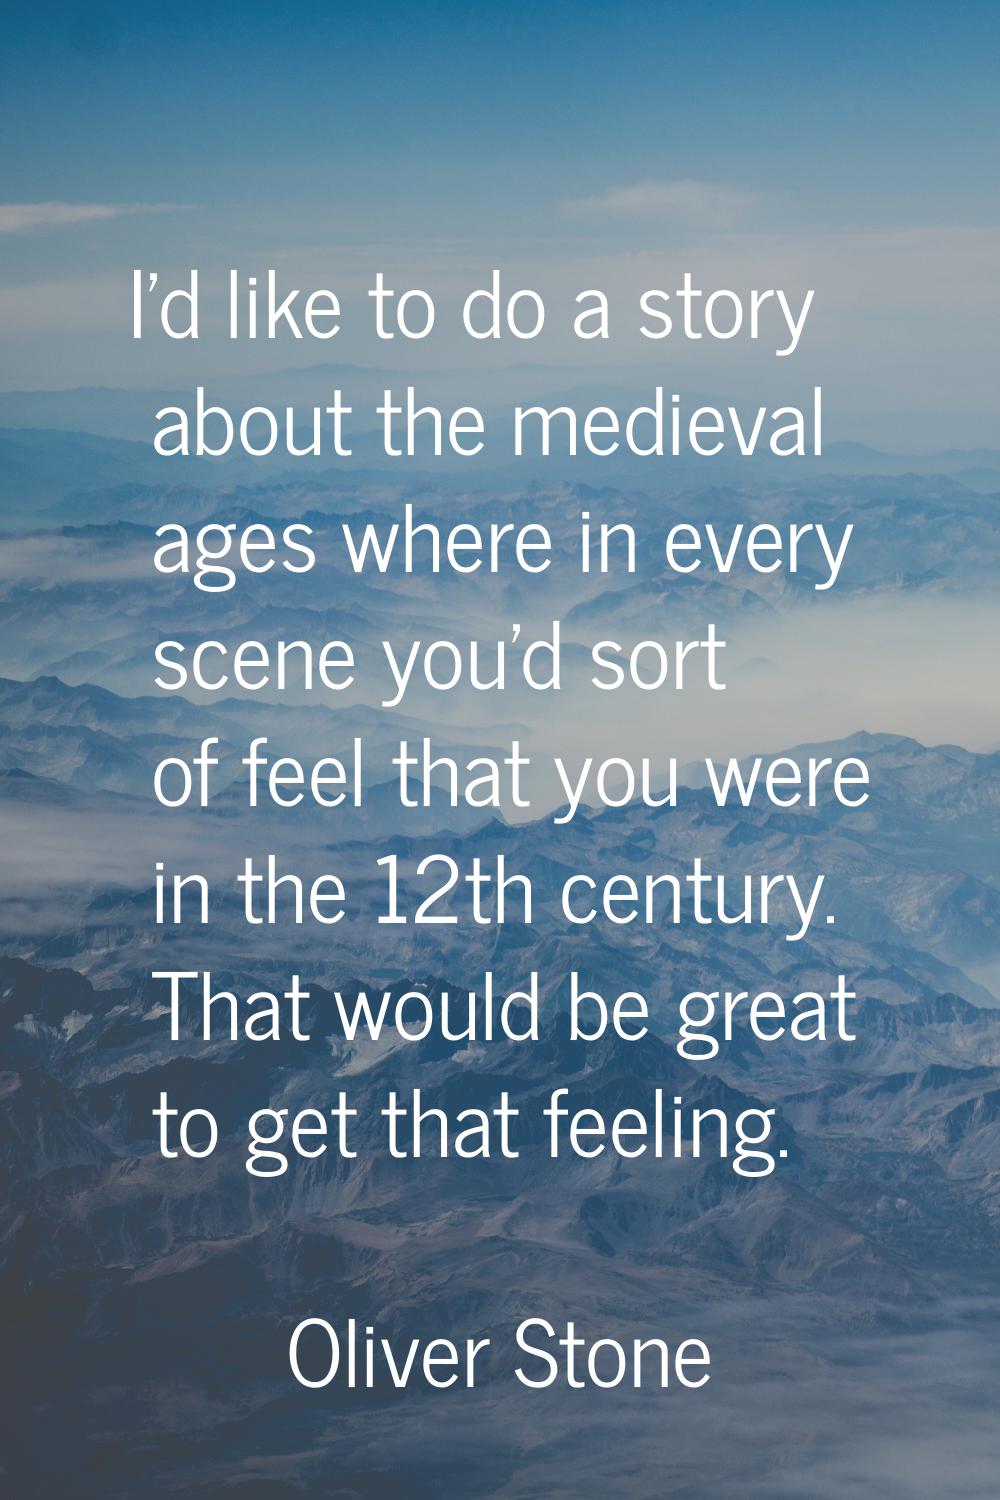 I'd like to do a story about the medieval ages where in every scene you'd sort of feel that you wer